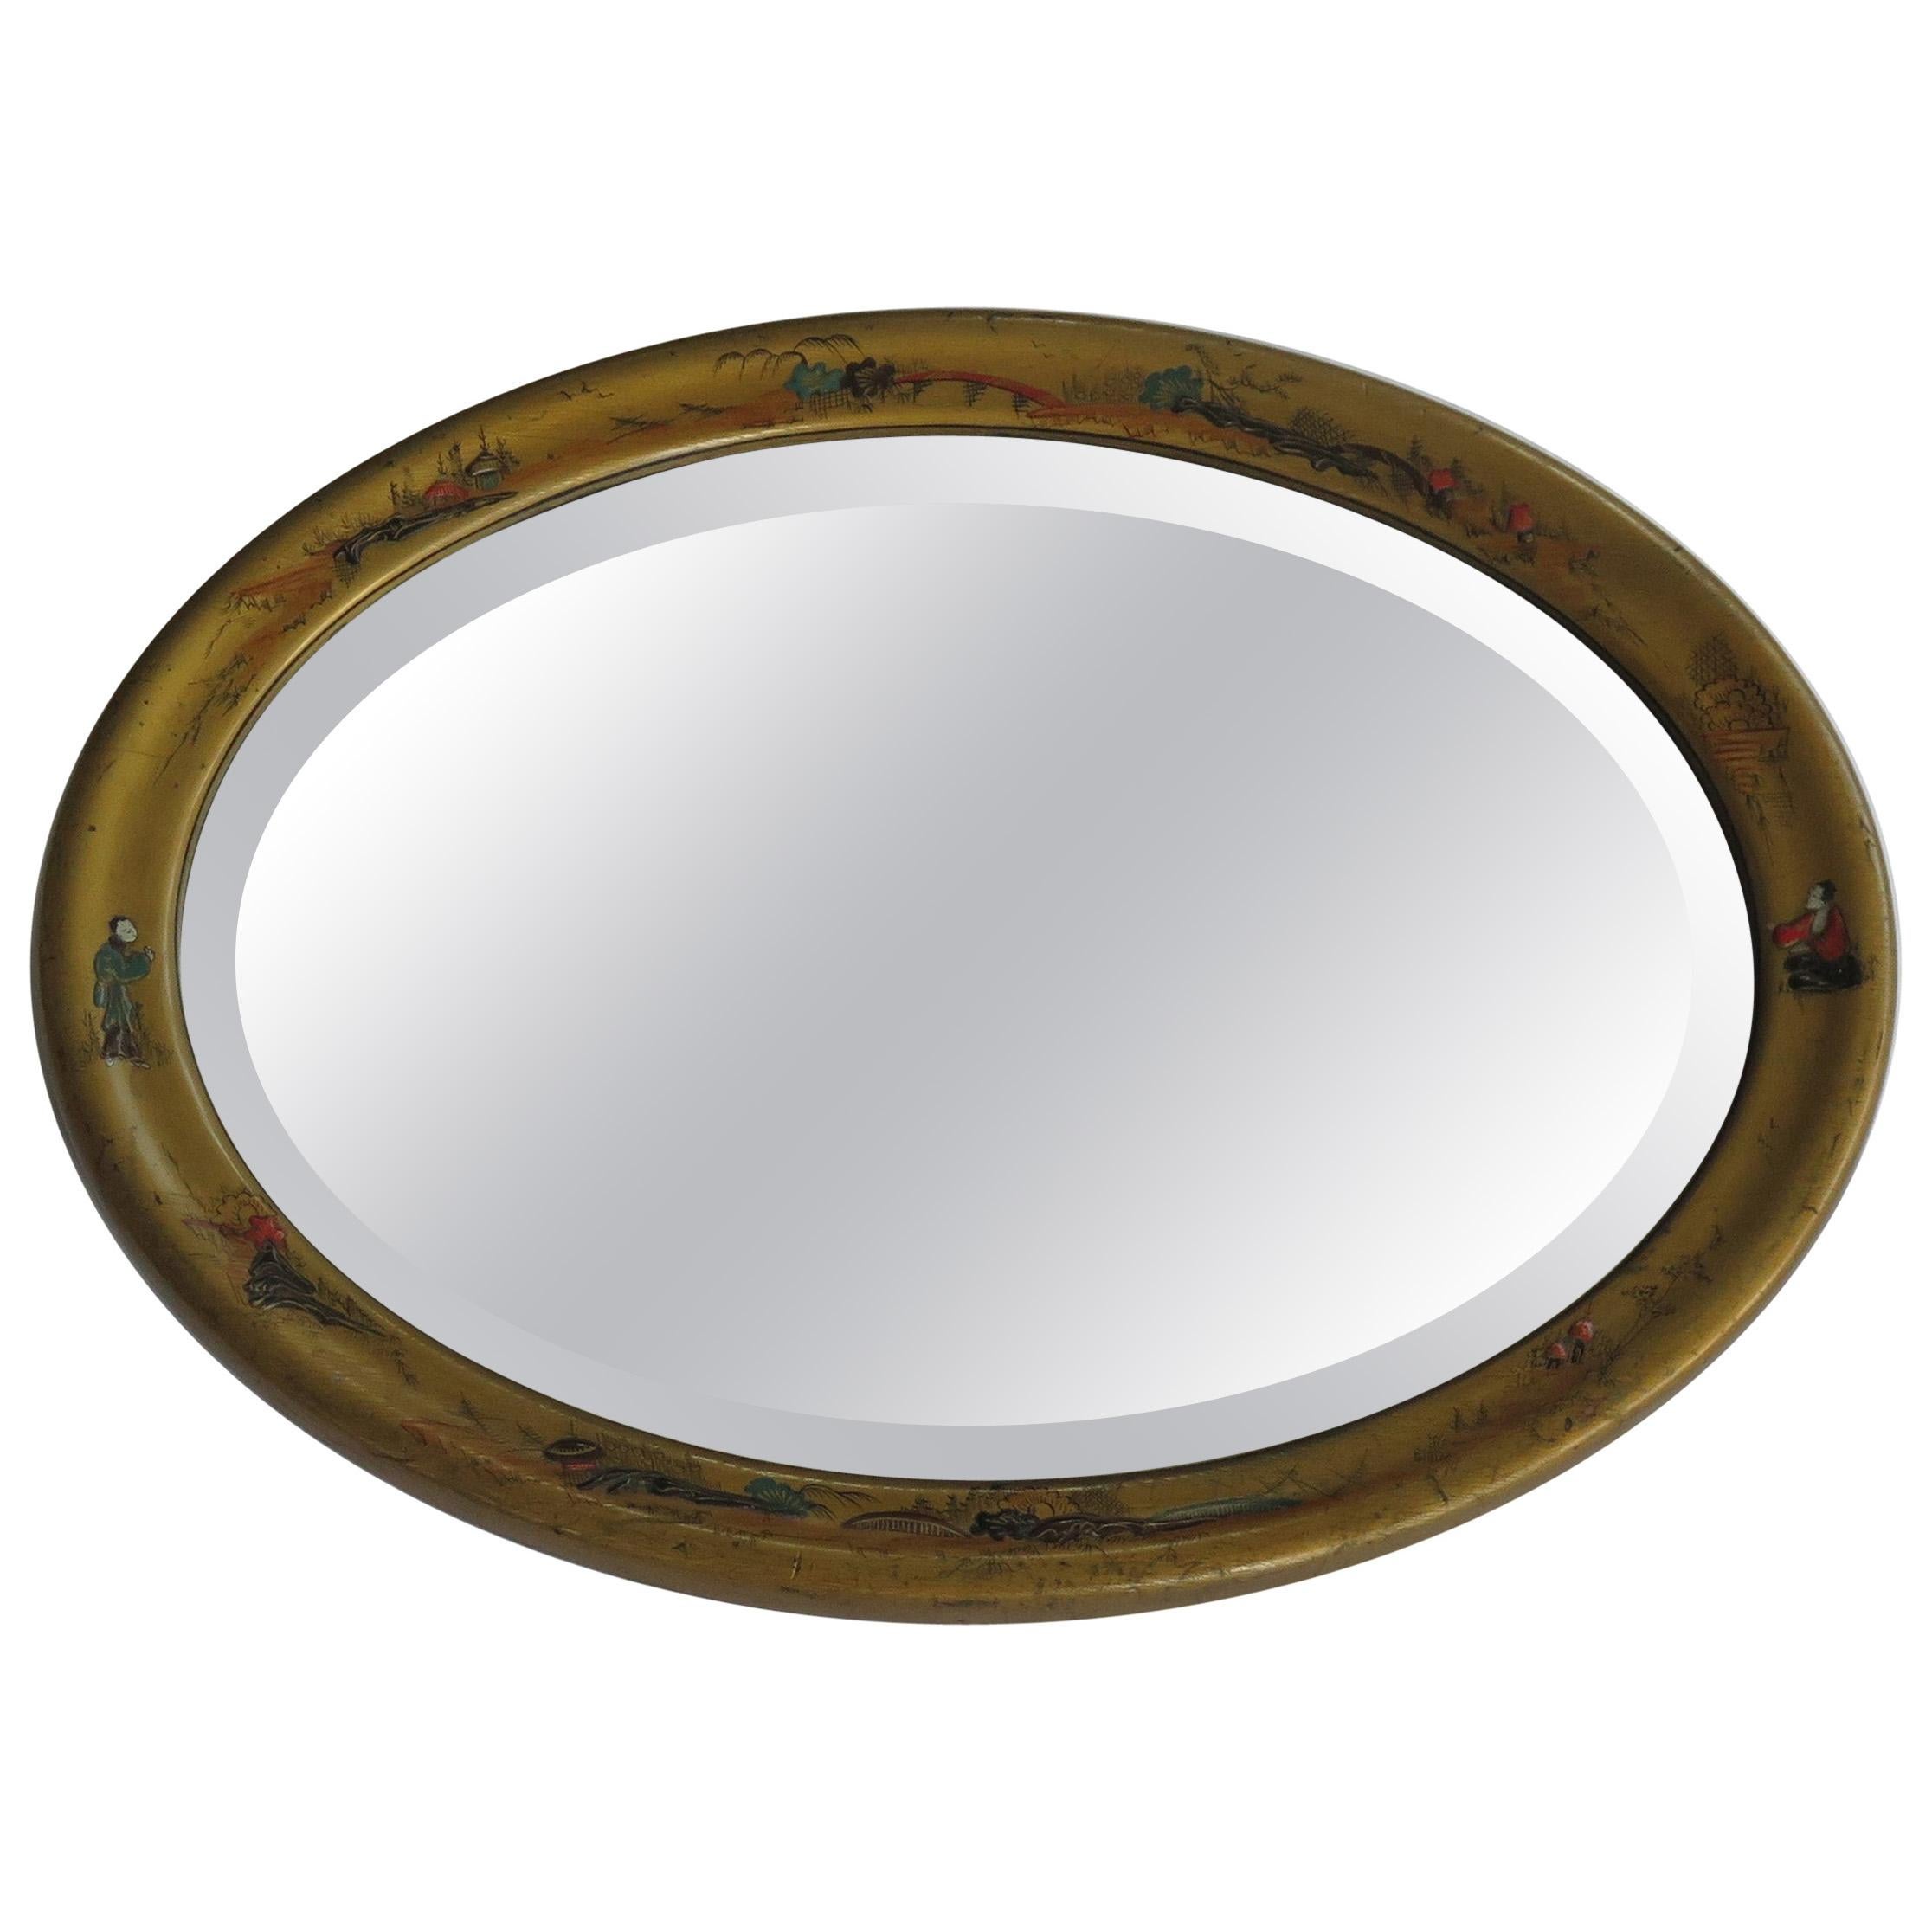 Oval Edwardian Gilt Chinoiserie Wall Mirror Bevelled Glass, English circa 1900 For Sale